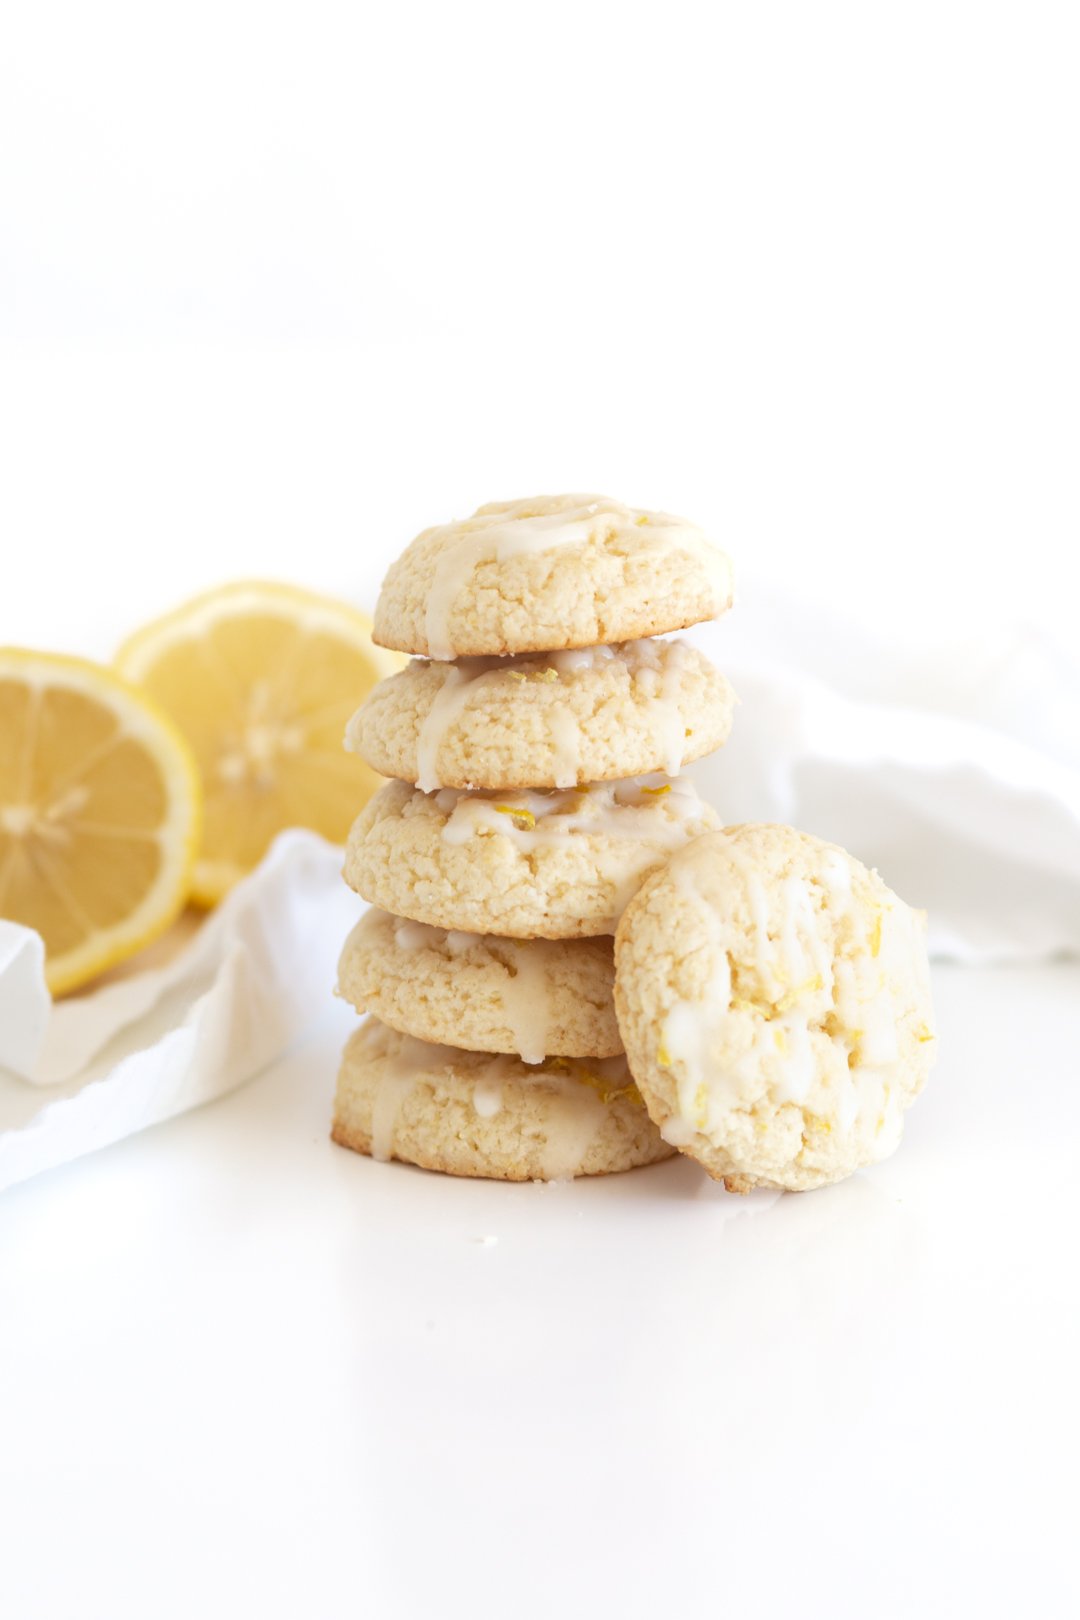 stack of five lemon cookies with an additional cookie leaning on the stalk. Halved lemons in the background.